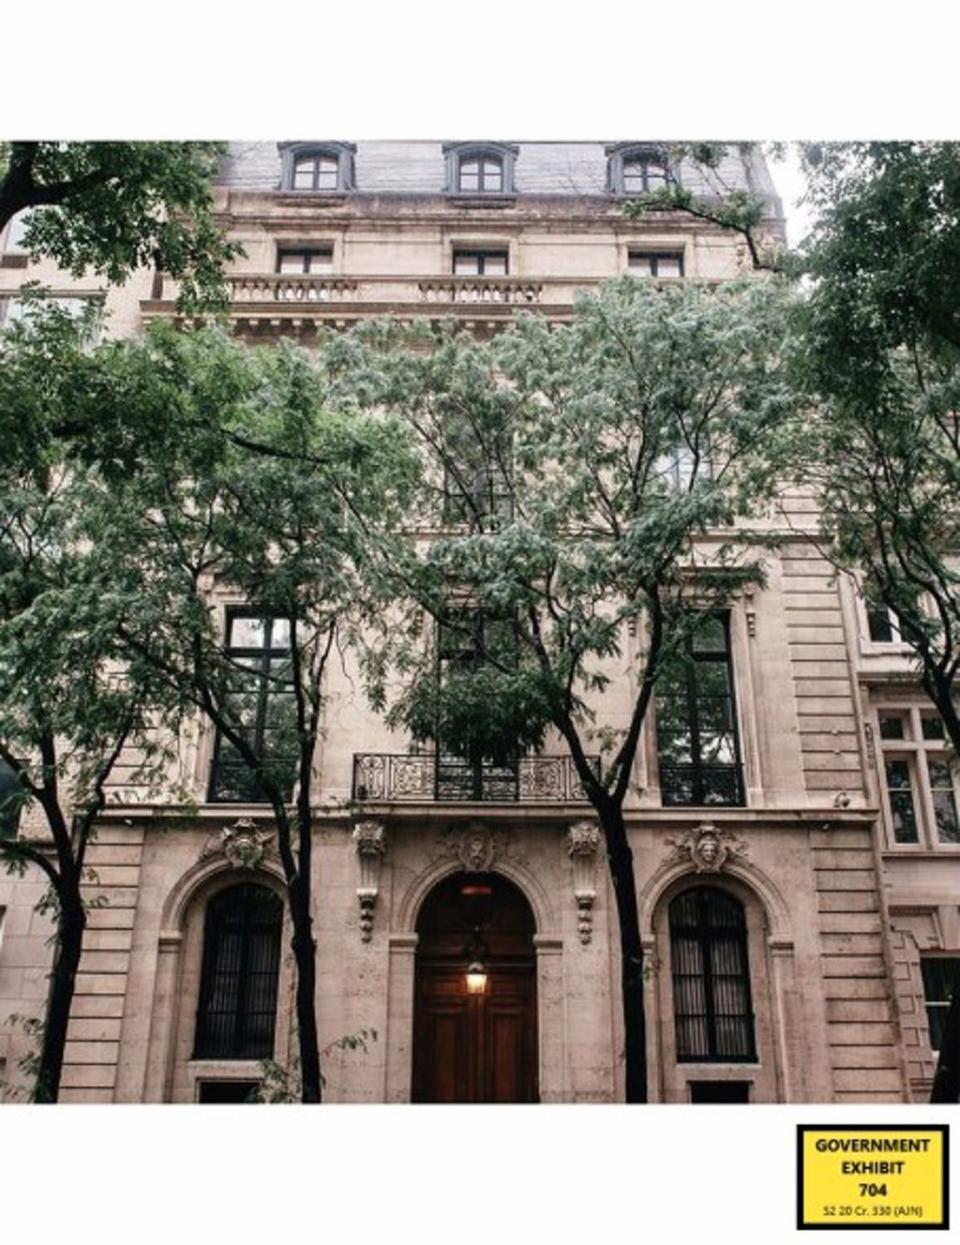 Eptein’s New York townhouse (US Department of Justice)